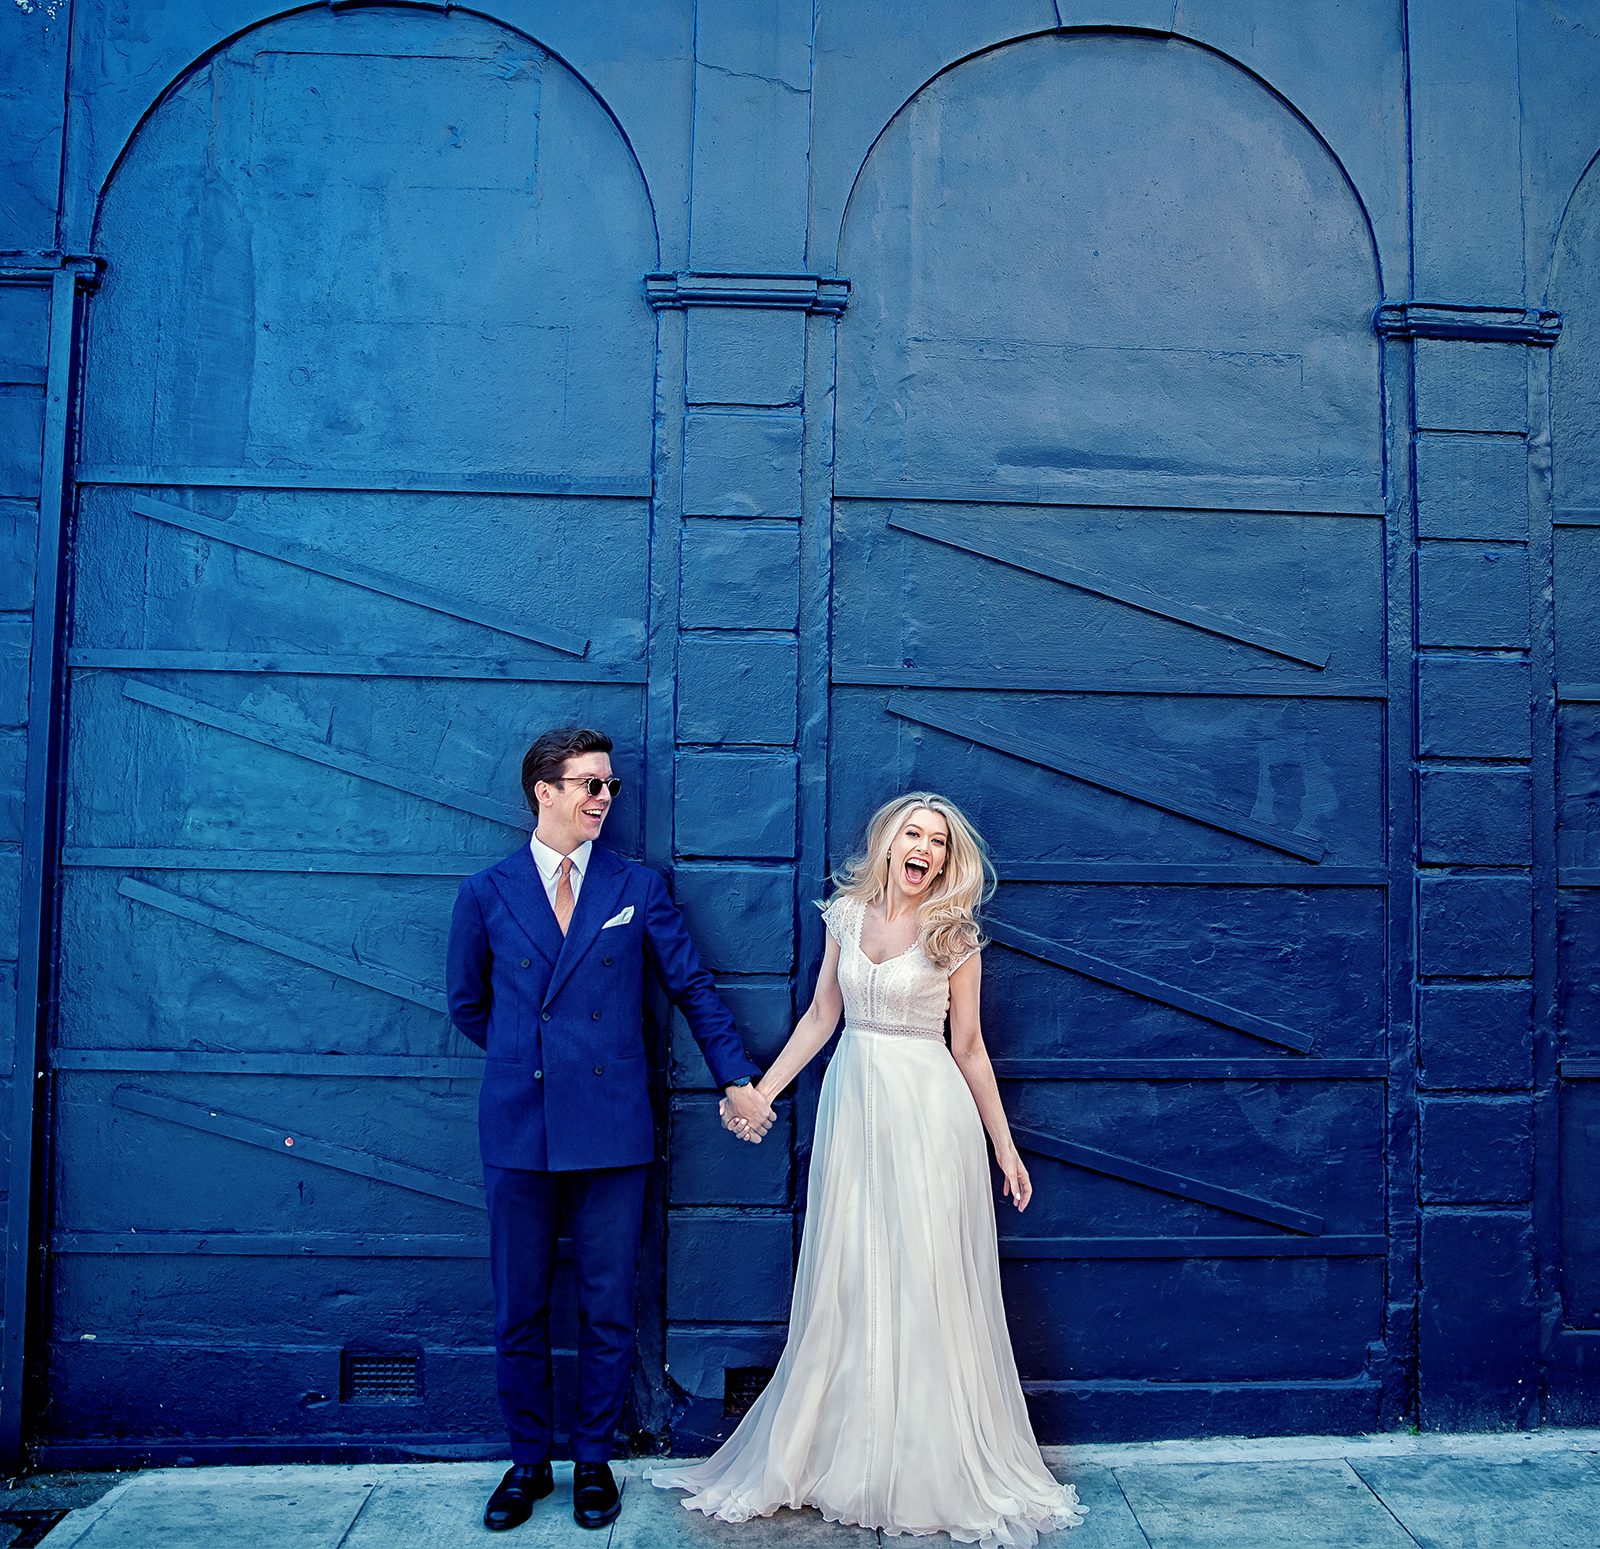 Islington Town Hall wedding couple pose by blue wall